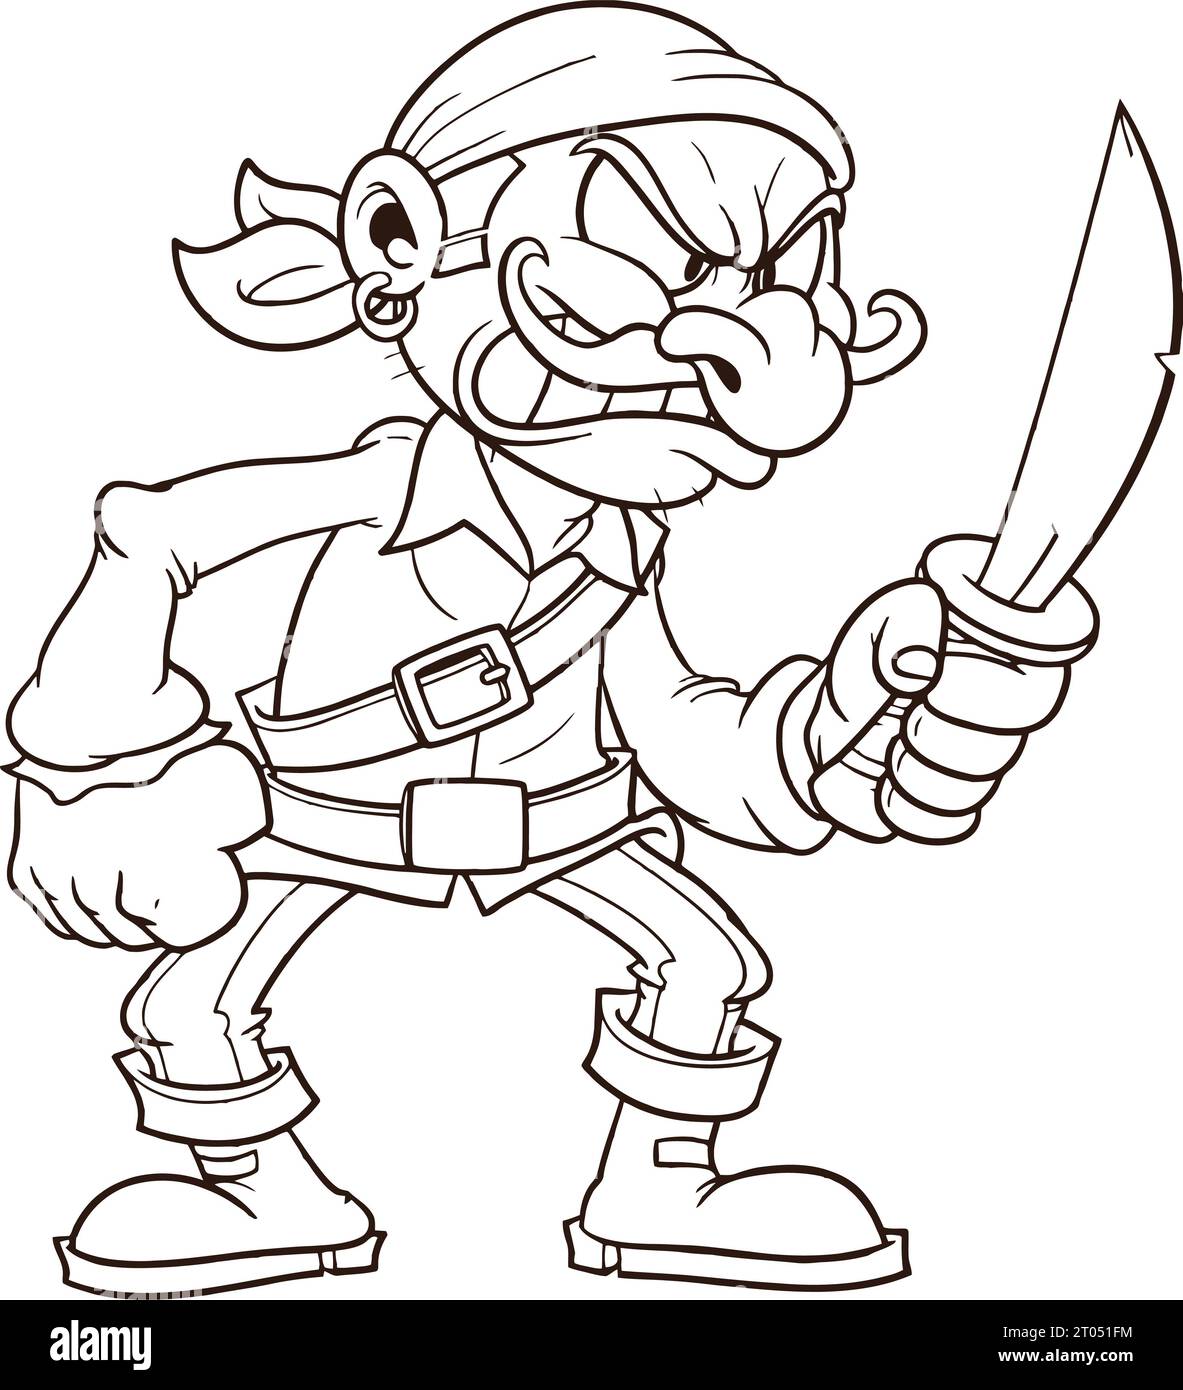 Angry cartoon pirate coloring page for kids Stock Photo